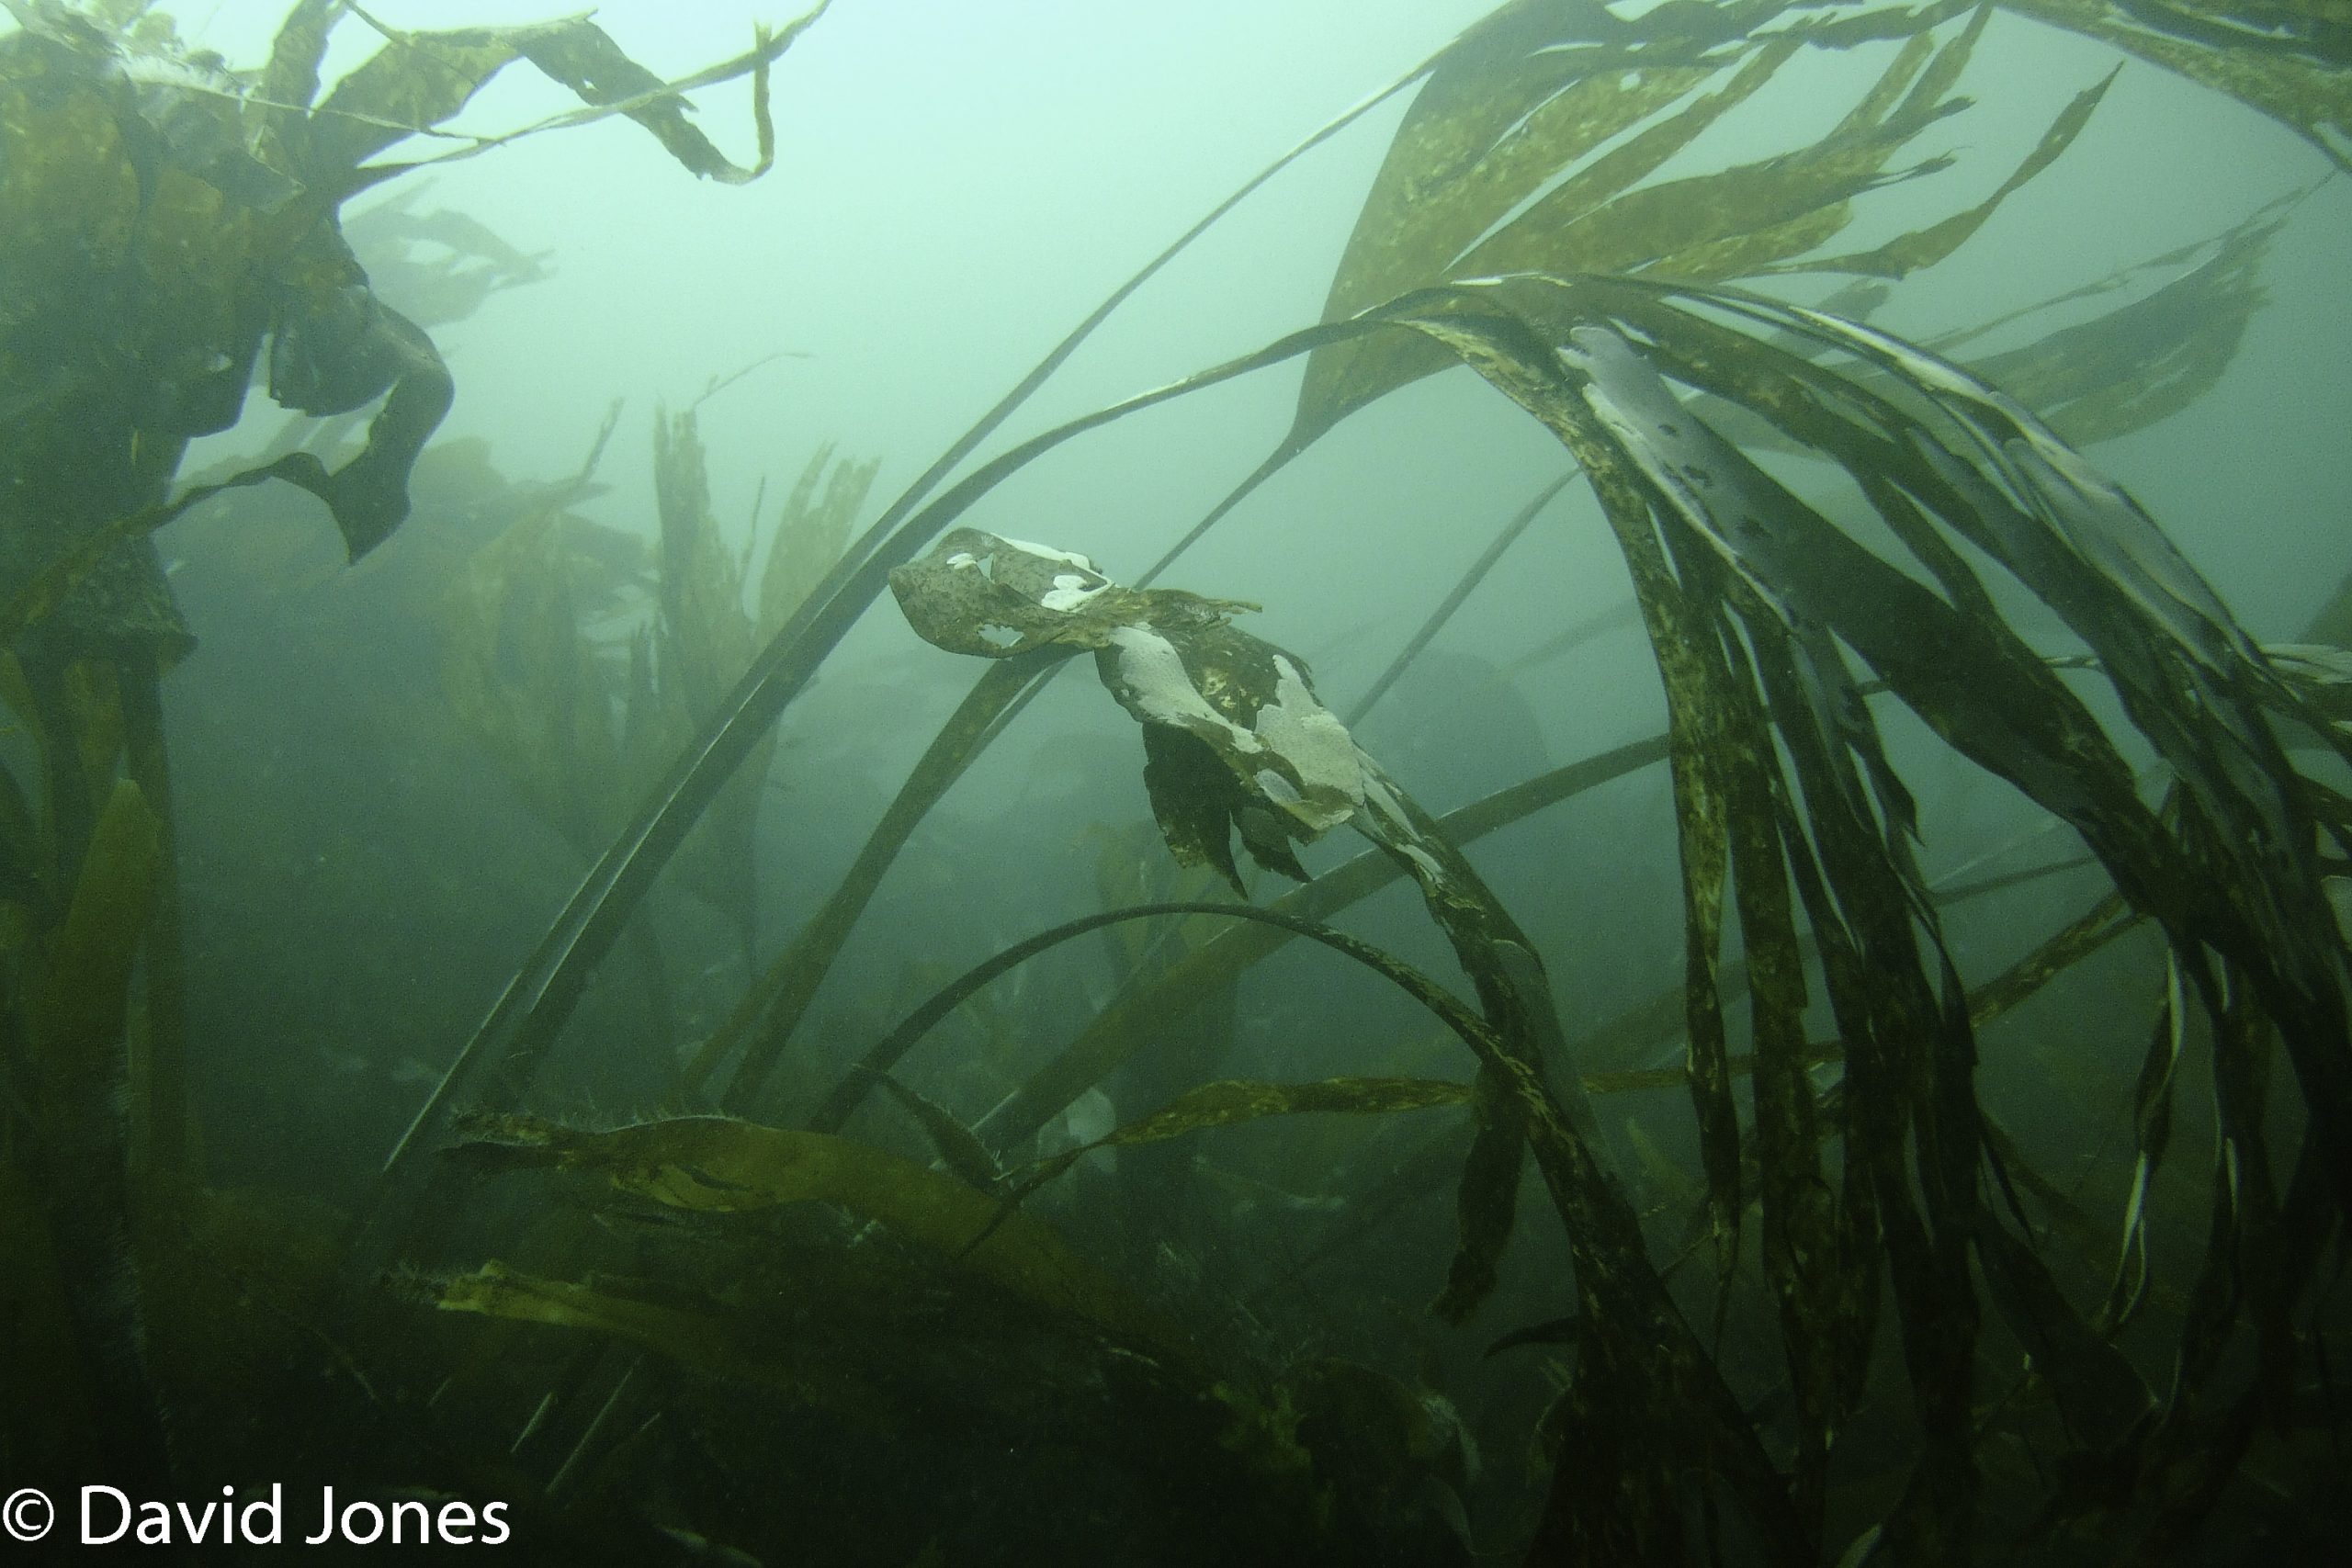 Trawl fishing ban off Sussex coast to protect Kelp forests